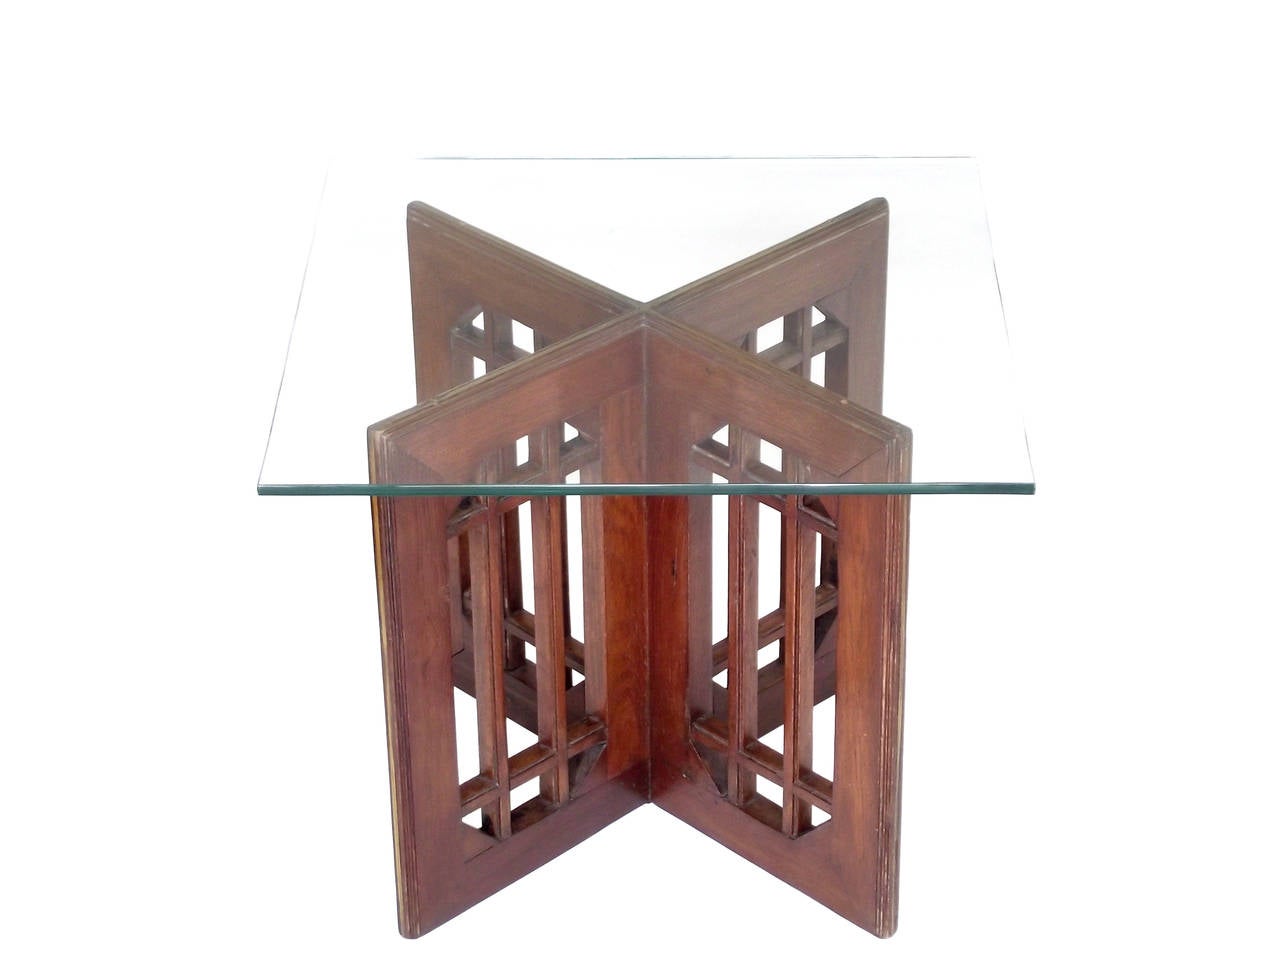 A pair of 1960s modern end tables in a cruciform shape with geometric 'church window' cut-out detail to each side, executed in solid wood (believed walnut) with inset brass trim along top and side edges. You could even add a single top to create a